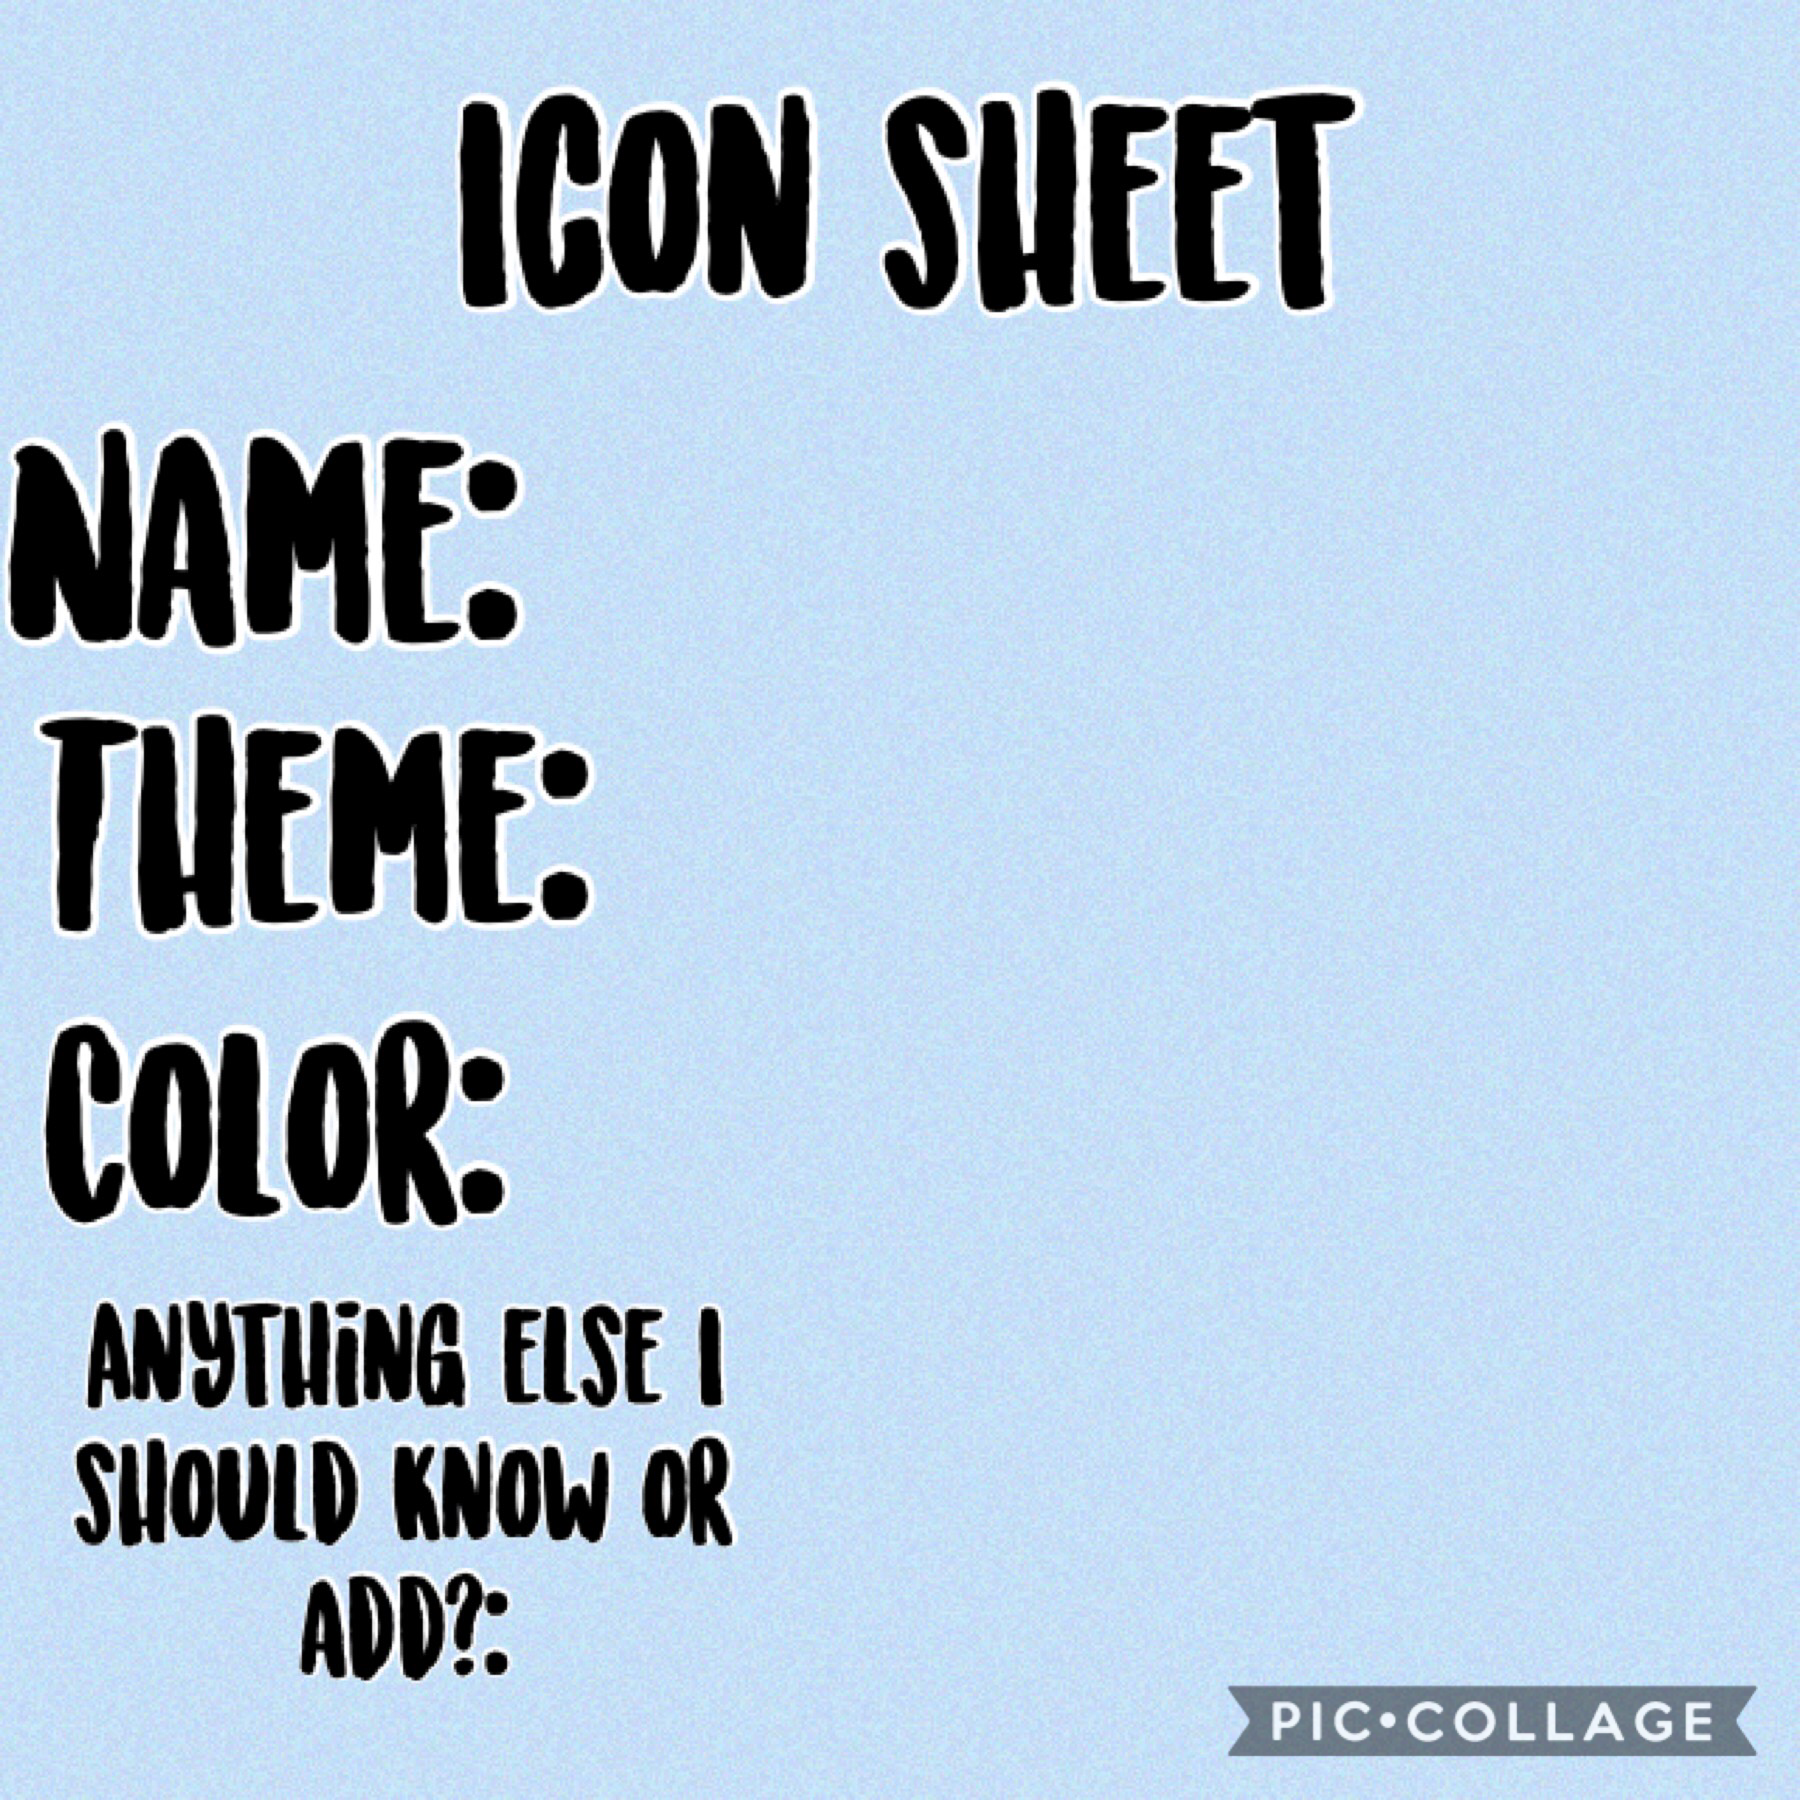 I’ll be happy to make you an icon!